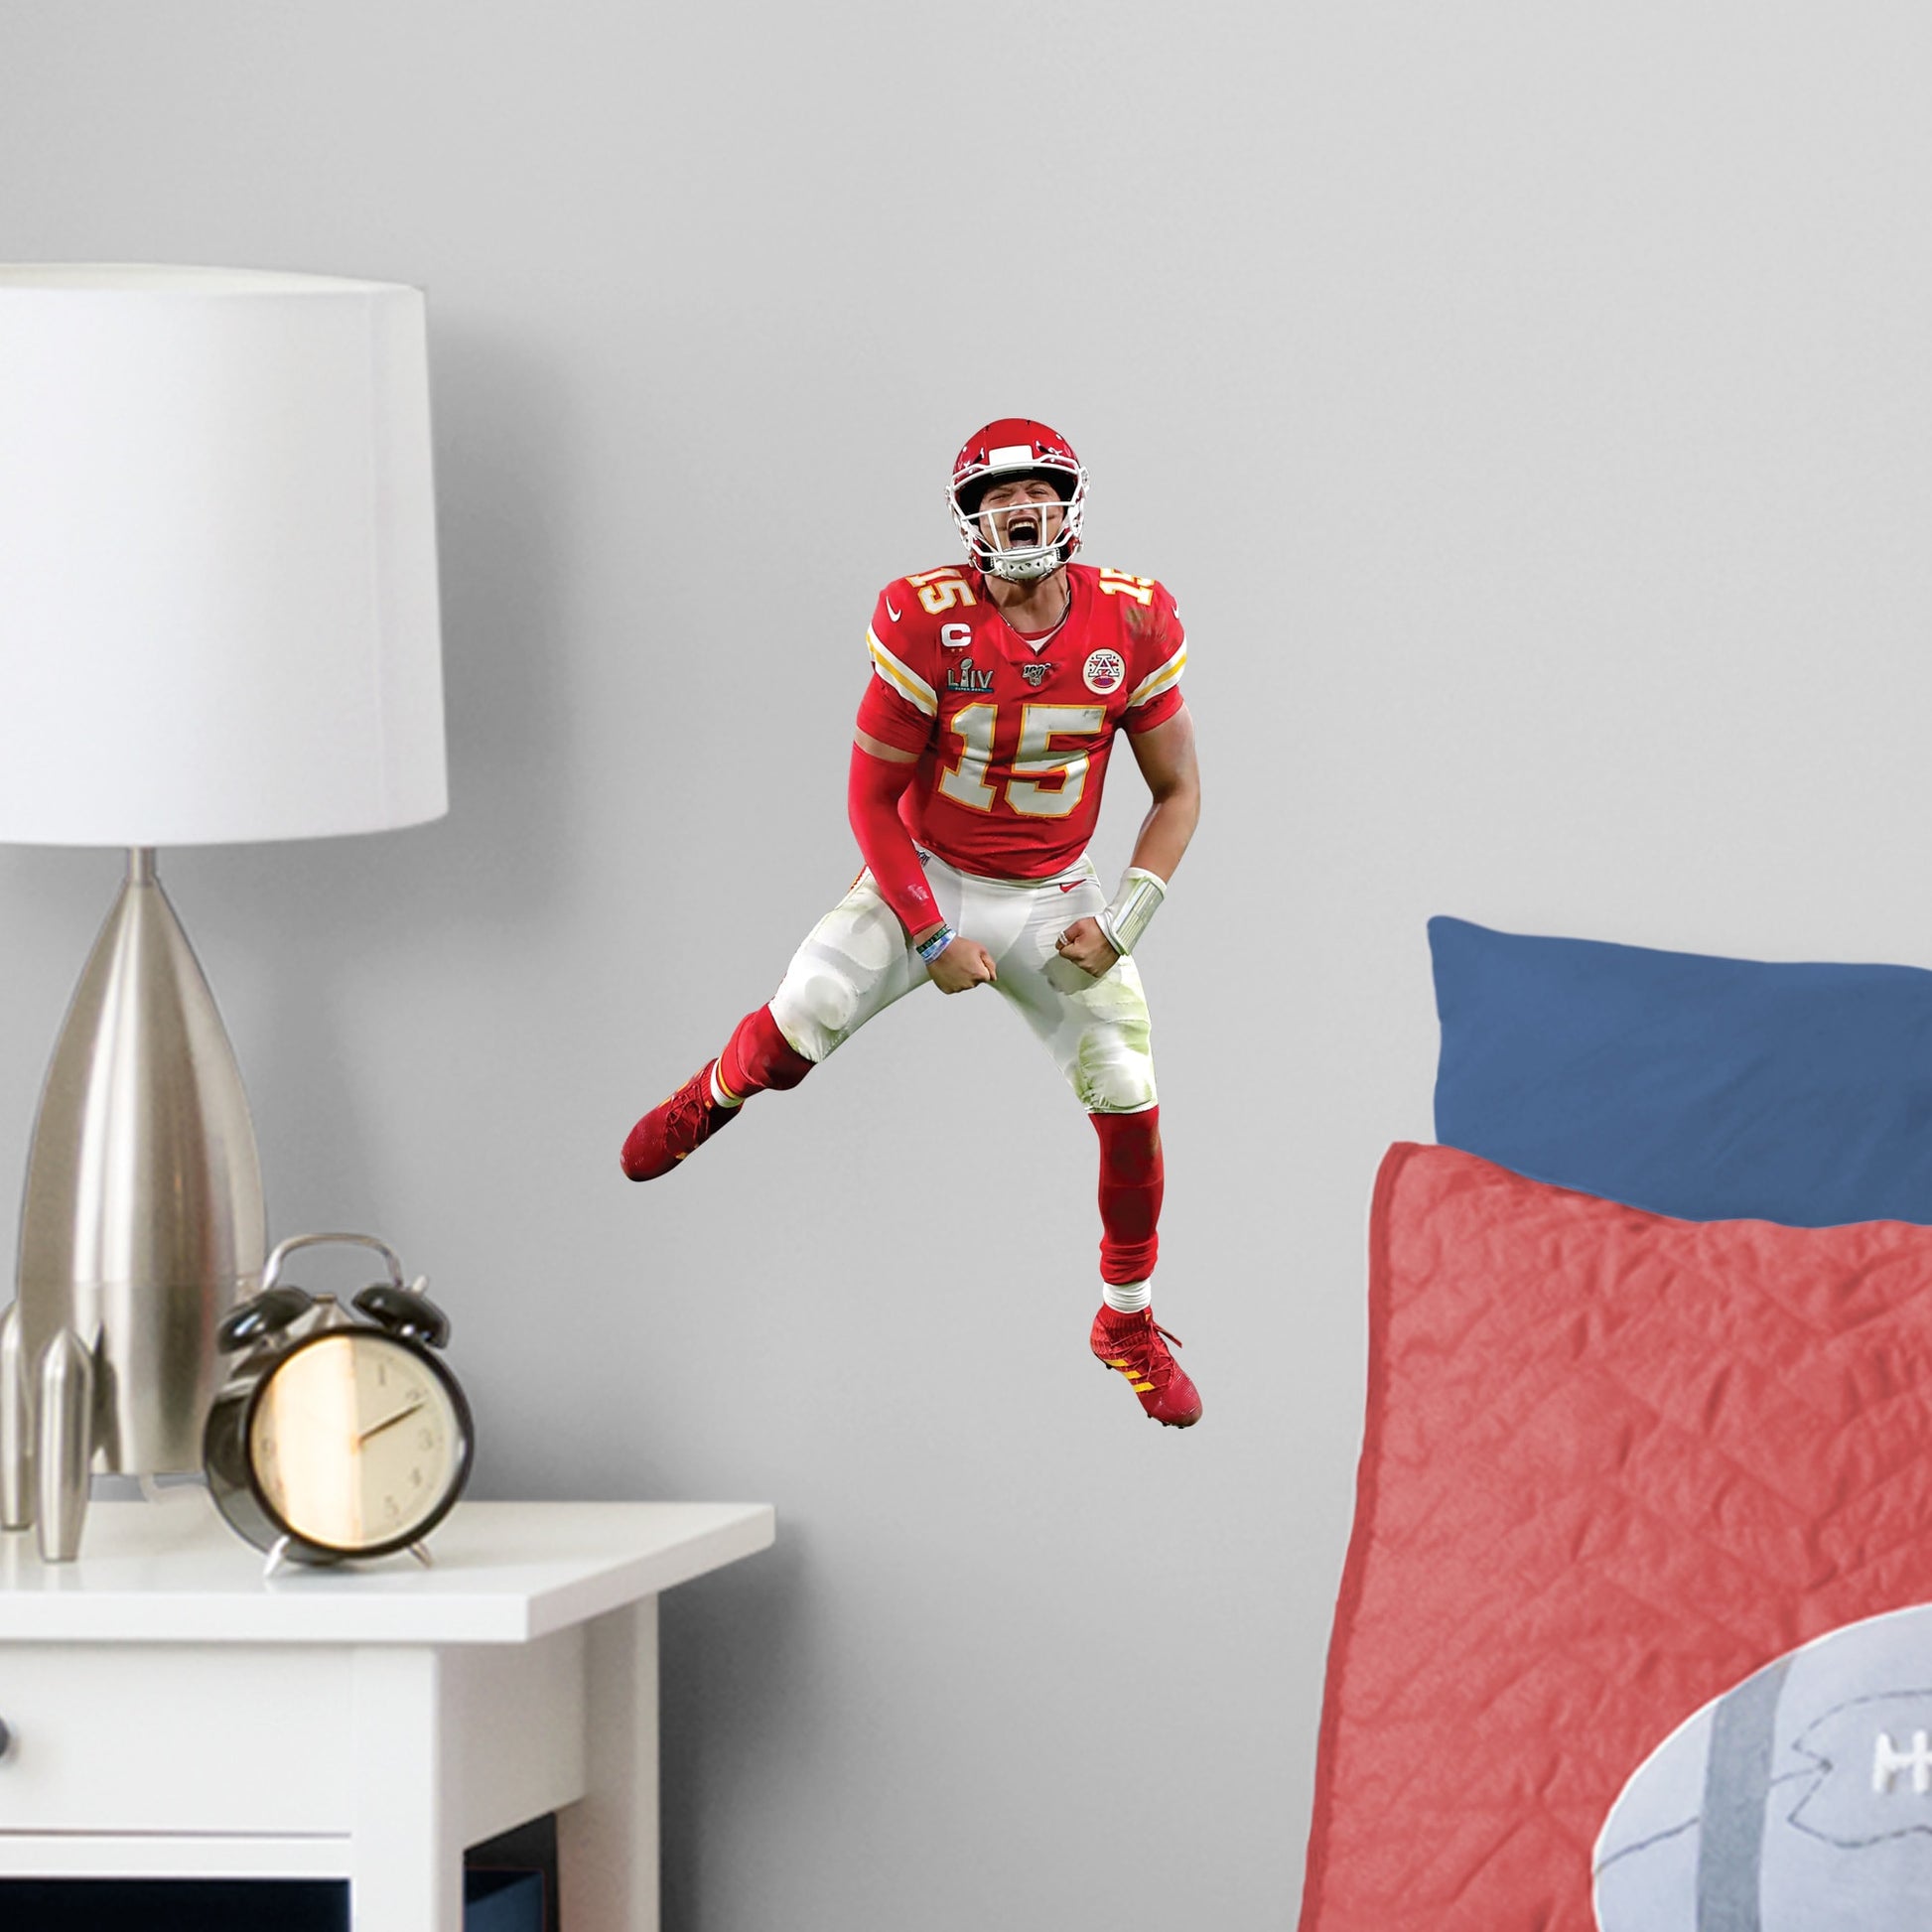 Large Athlete + 2 Decals (9"W x 16.5"H) Celebrate the Chiefs' epic Super Bowl LIV win over the 49ers with this high-quality, repositionable decal of MVP quarterback Patrick Mahomes celebrating the victory. Featuring plenty of the Chiefs' red and gold, this enthusiastic Magic Mahomes decal will brighten every day of your week. It's perfect for dorms, bedrooms, and sports bars because this durable, reusable Mahomes decal only damages the competition, not your walls.